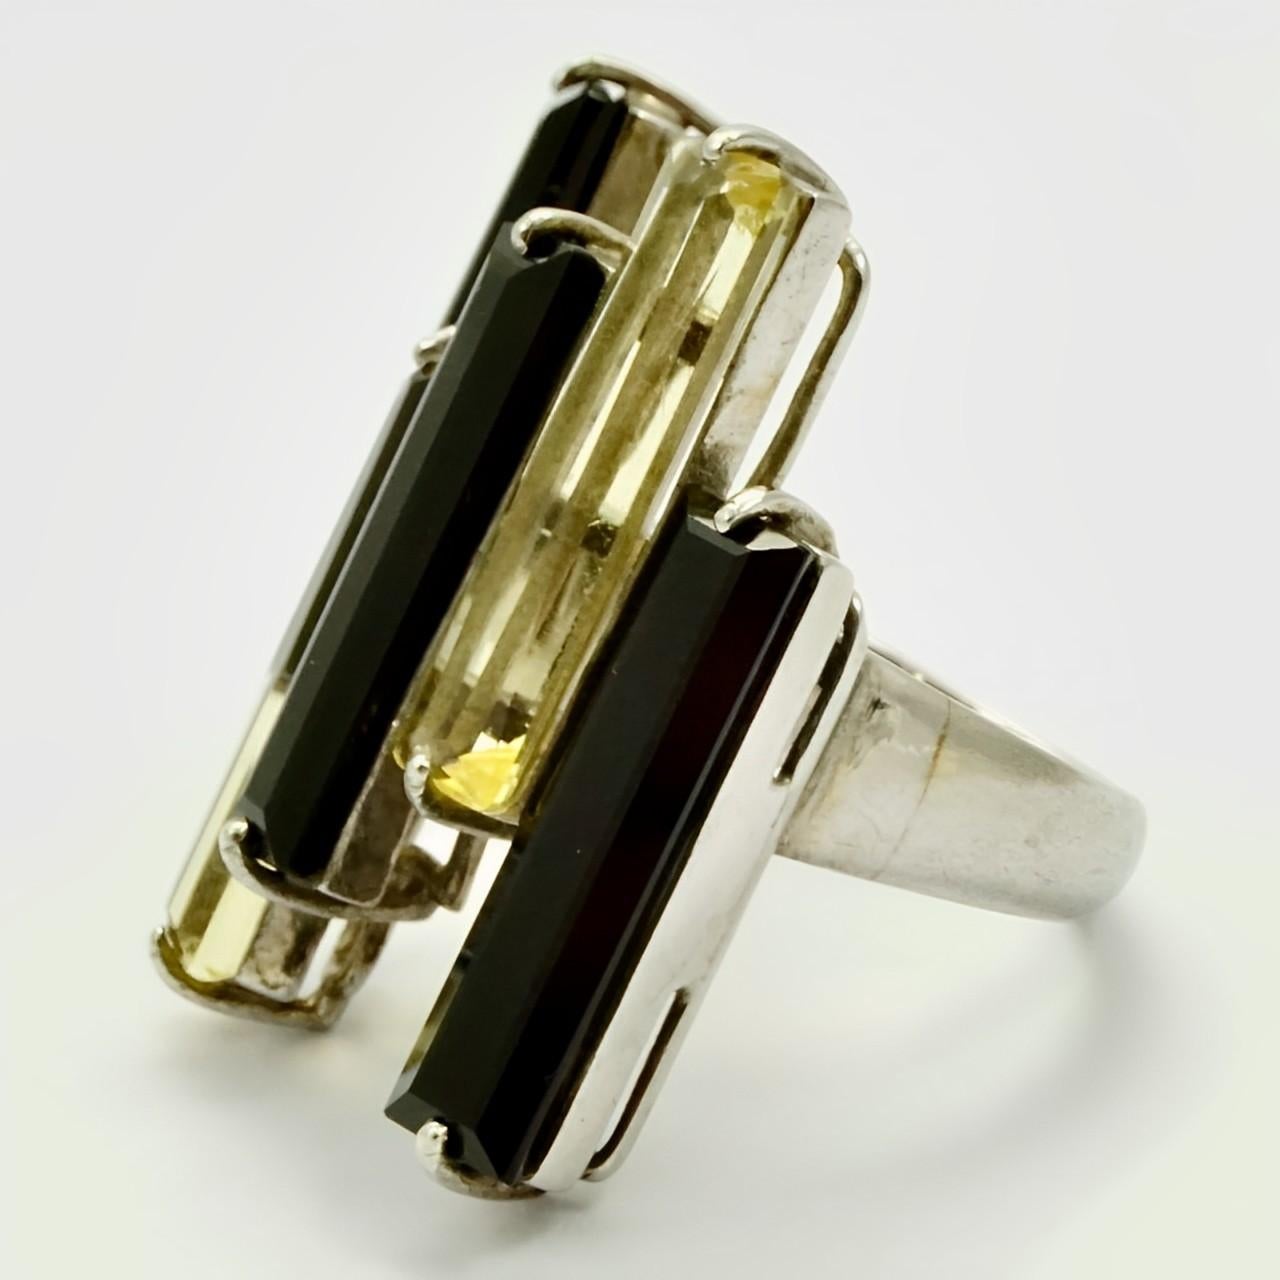 Wonderful sterling silver ring set with black and citrine faceted glass. Ring size UK N 1/2, US 6 3/4, and measuring inside diameter approximately 1.8 cm / .7 inch. The glass stones are 2 cm / .78 inch each in length. The silver has scratching as